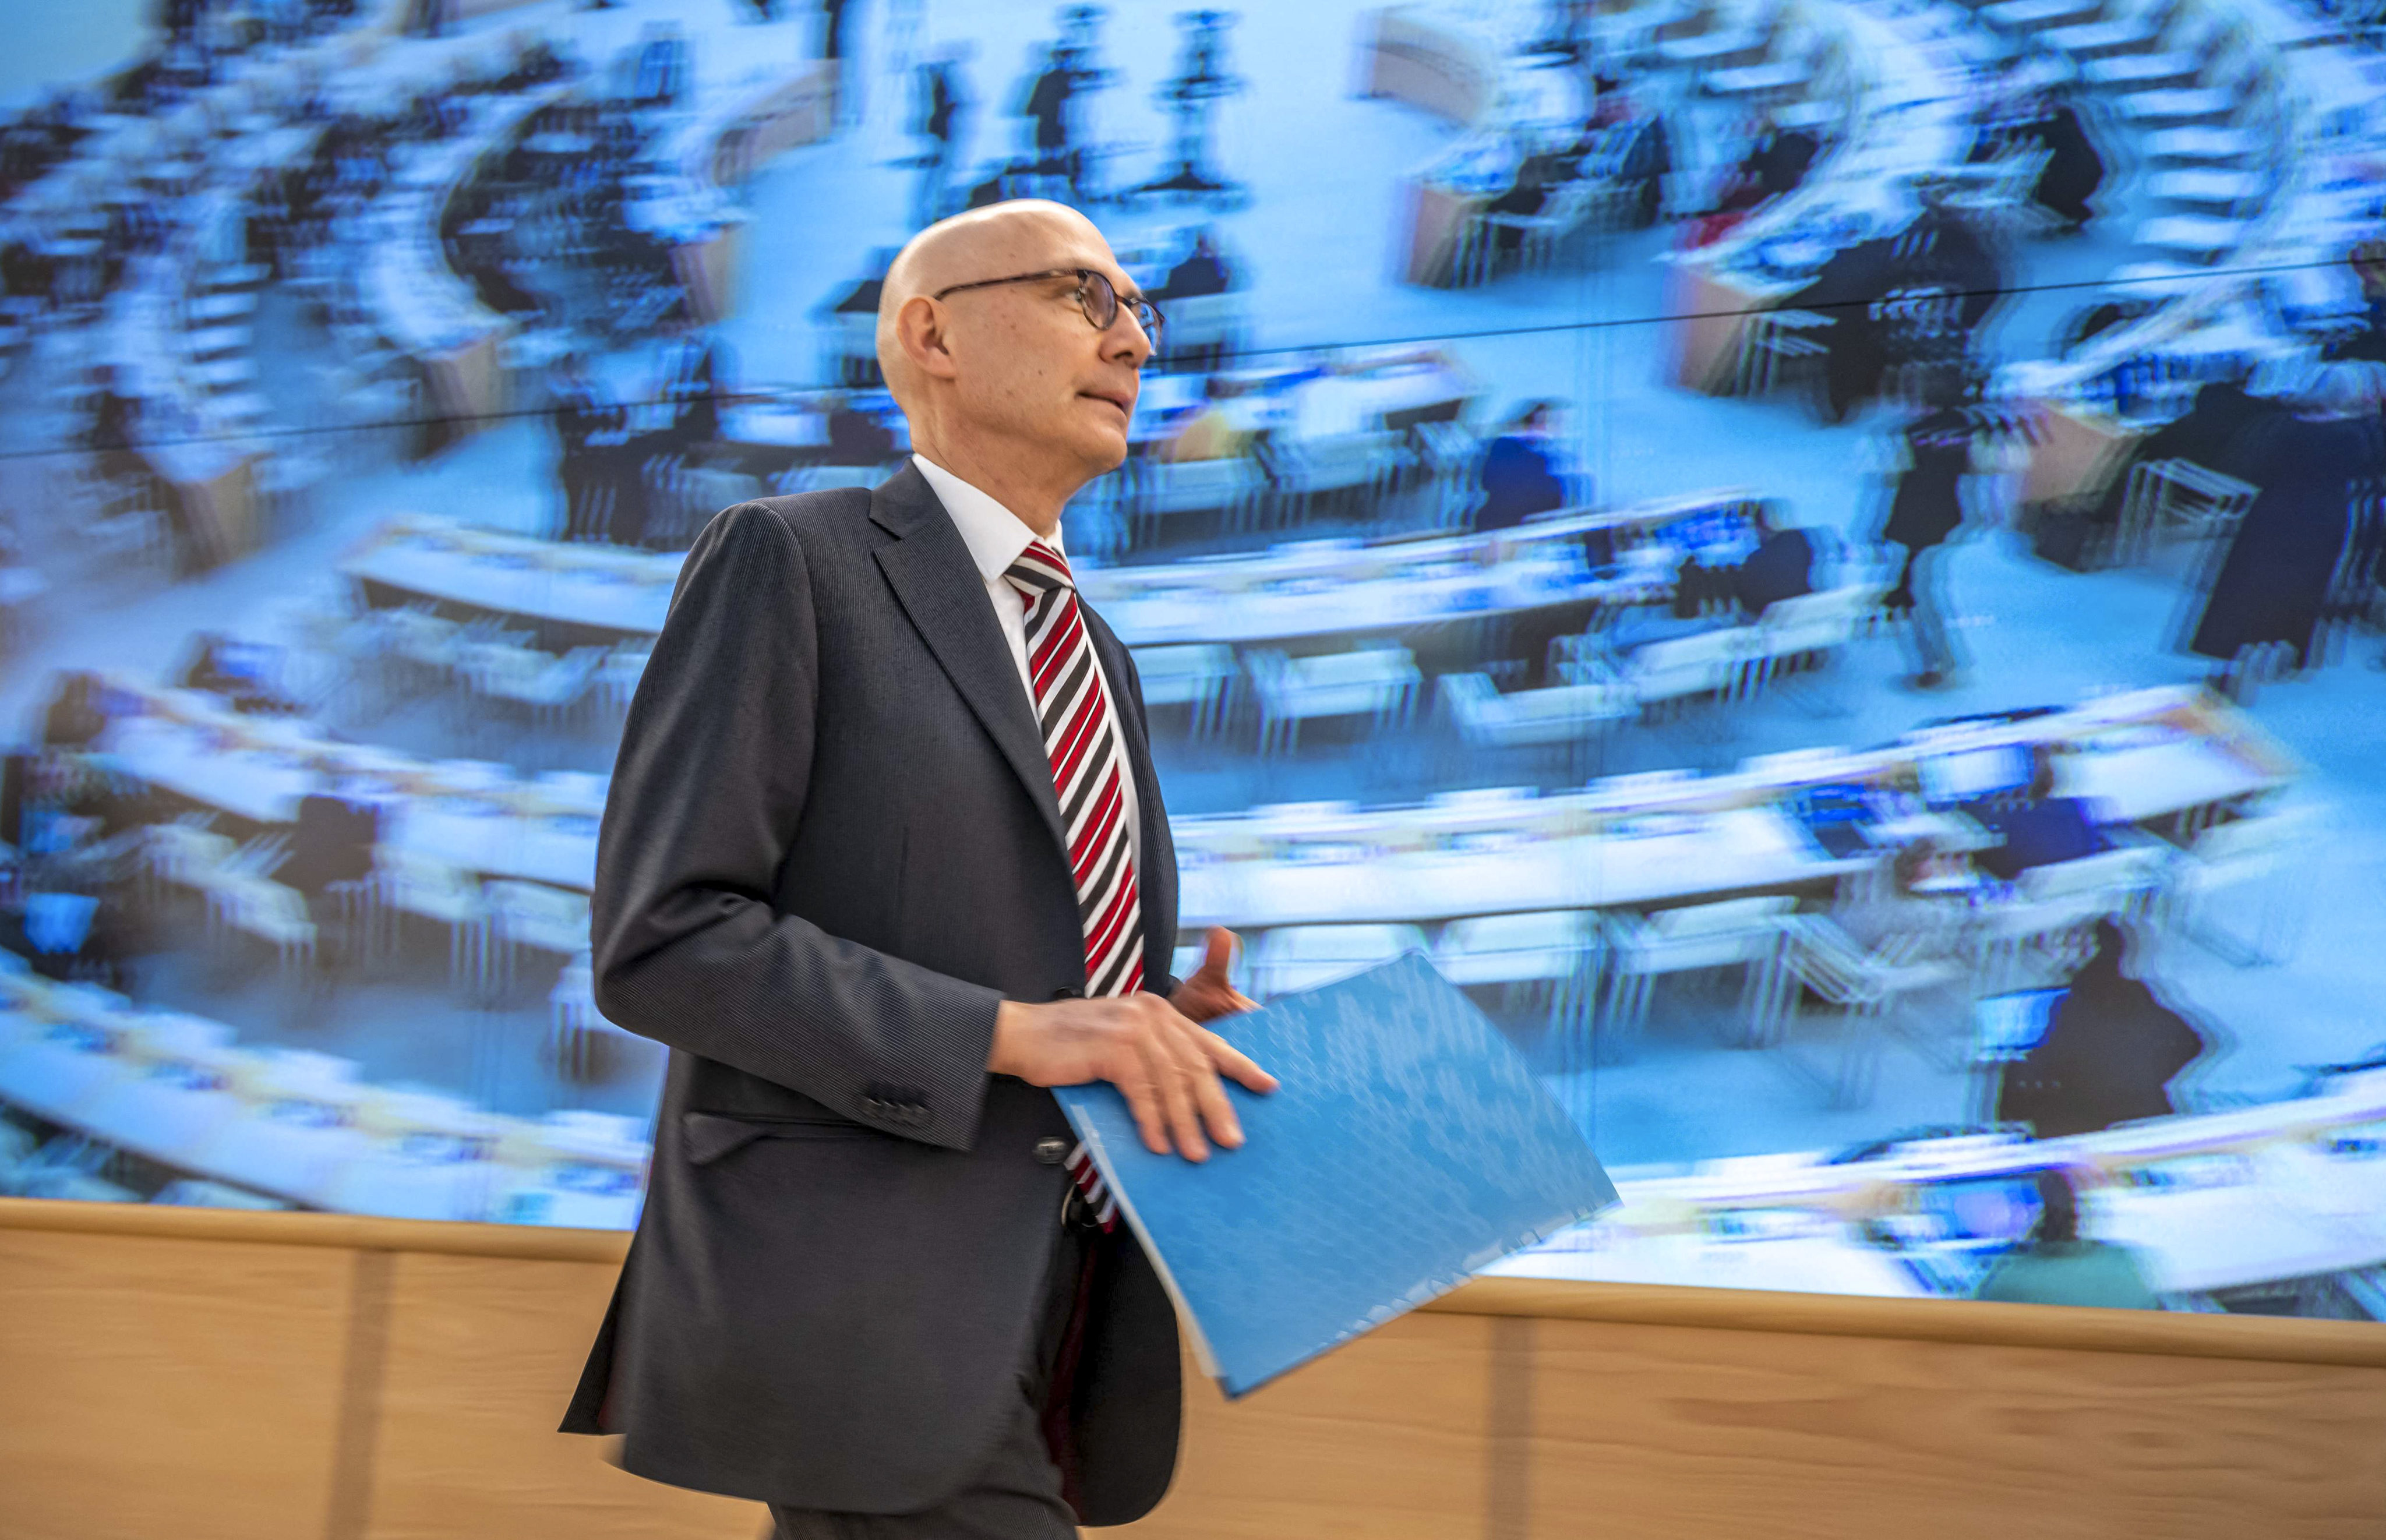 UN High Commissioner for Human Rights Volker Turk arriving for a session of the 52nd UN Human Rights Council, in Geneva, on Monday. Photo: AFP